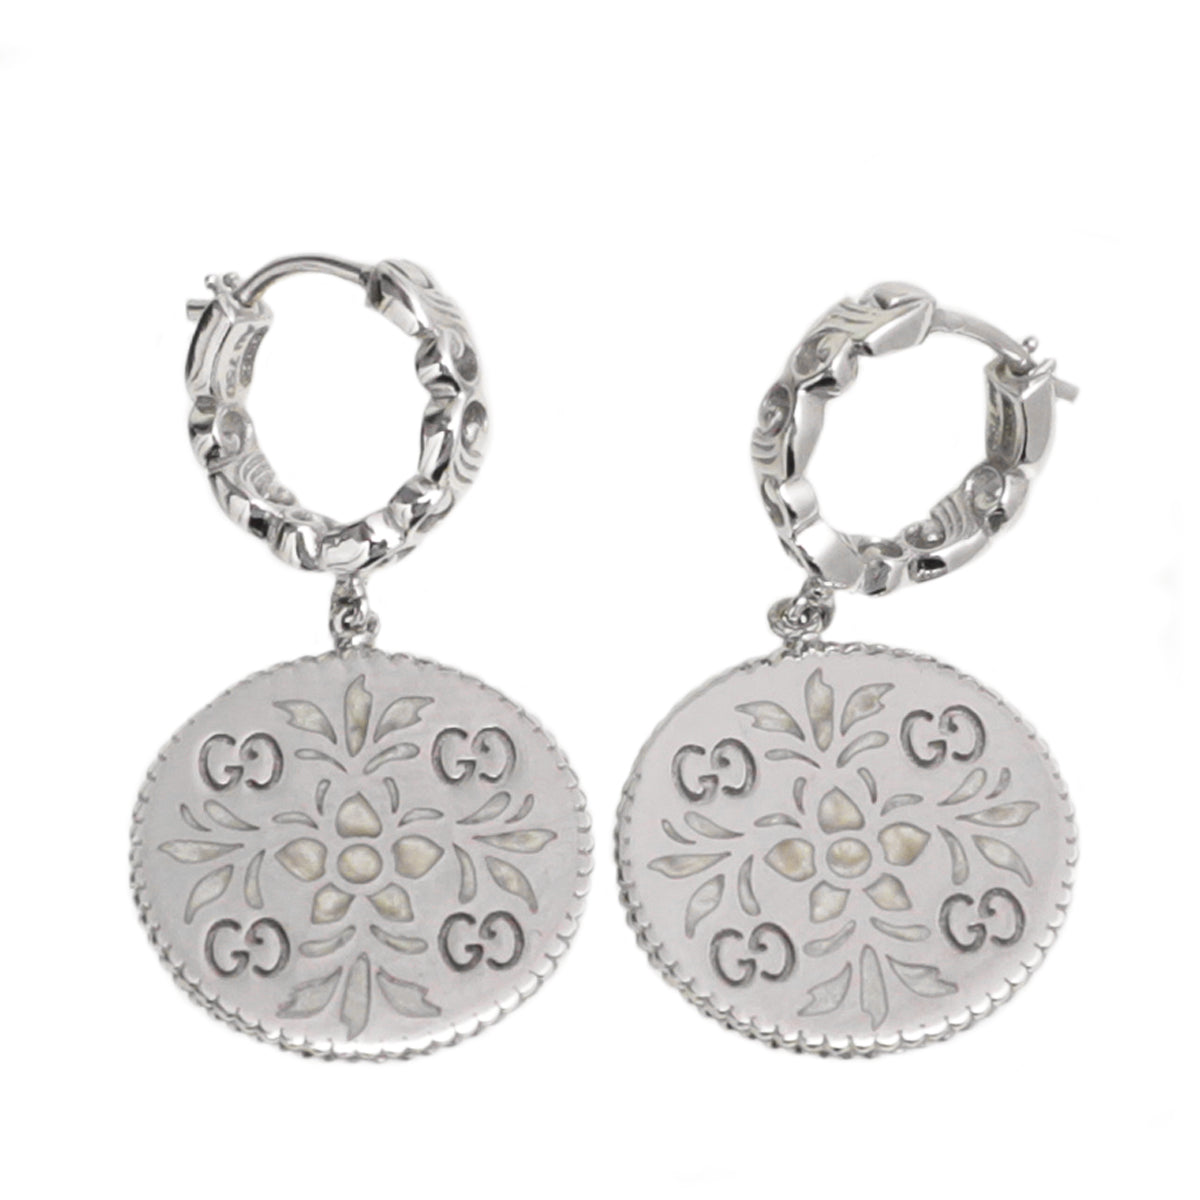 Gucci 18K White Gold GG Floral Hoop Drop Earrings